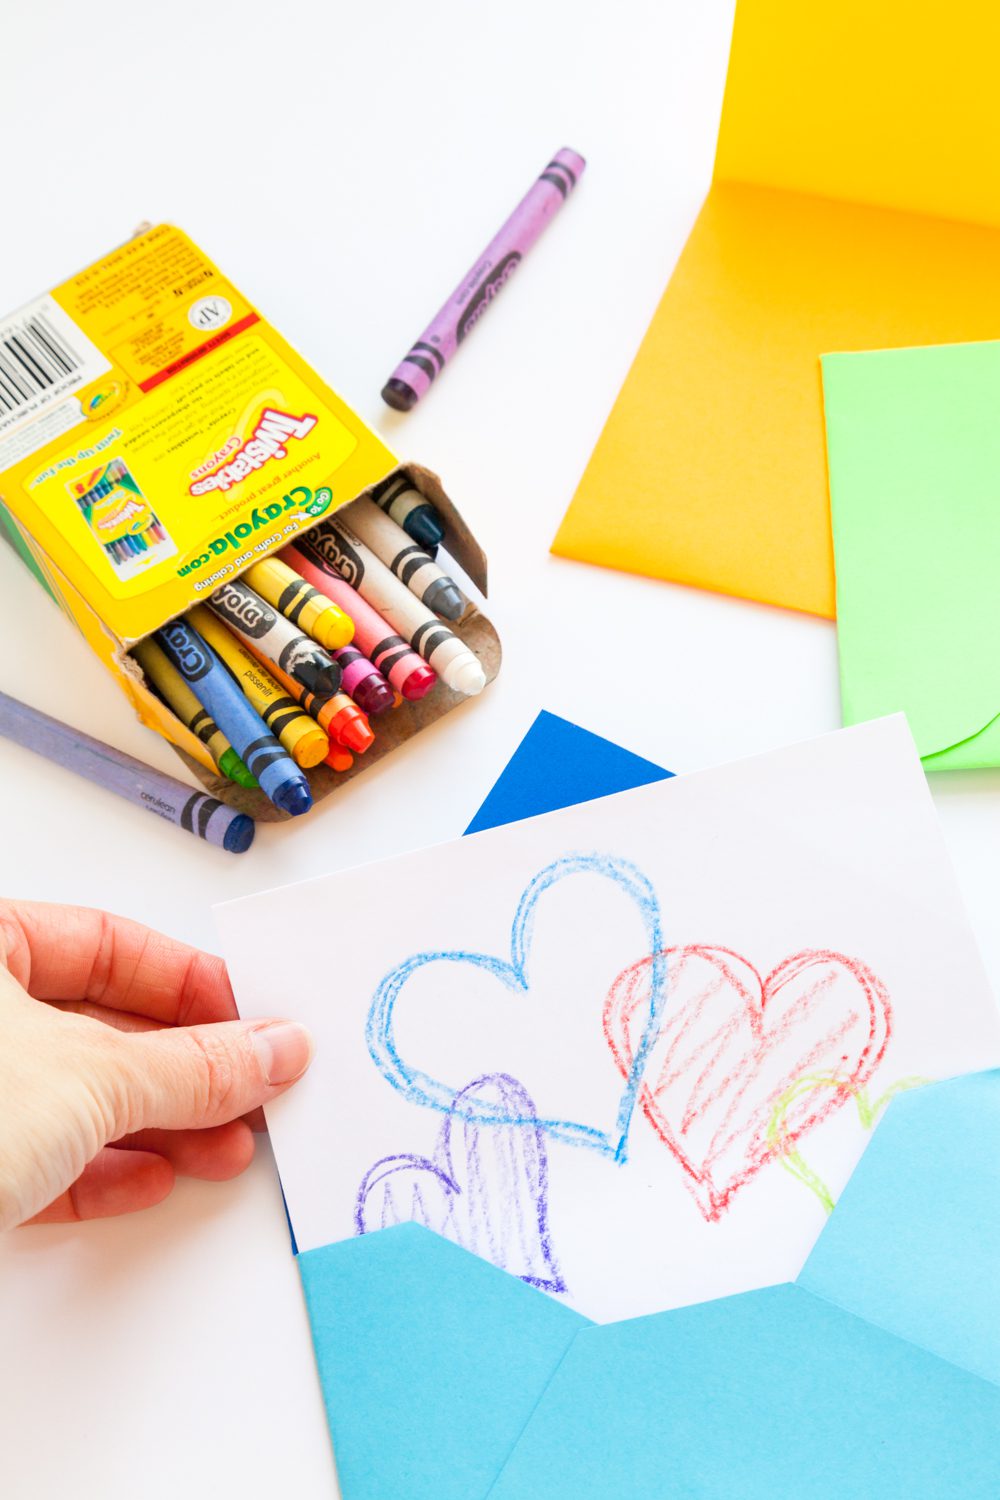 Pulling a card with hearts from a blue handmade envelope, with crayons and colorful paper nearby.